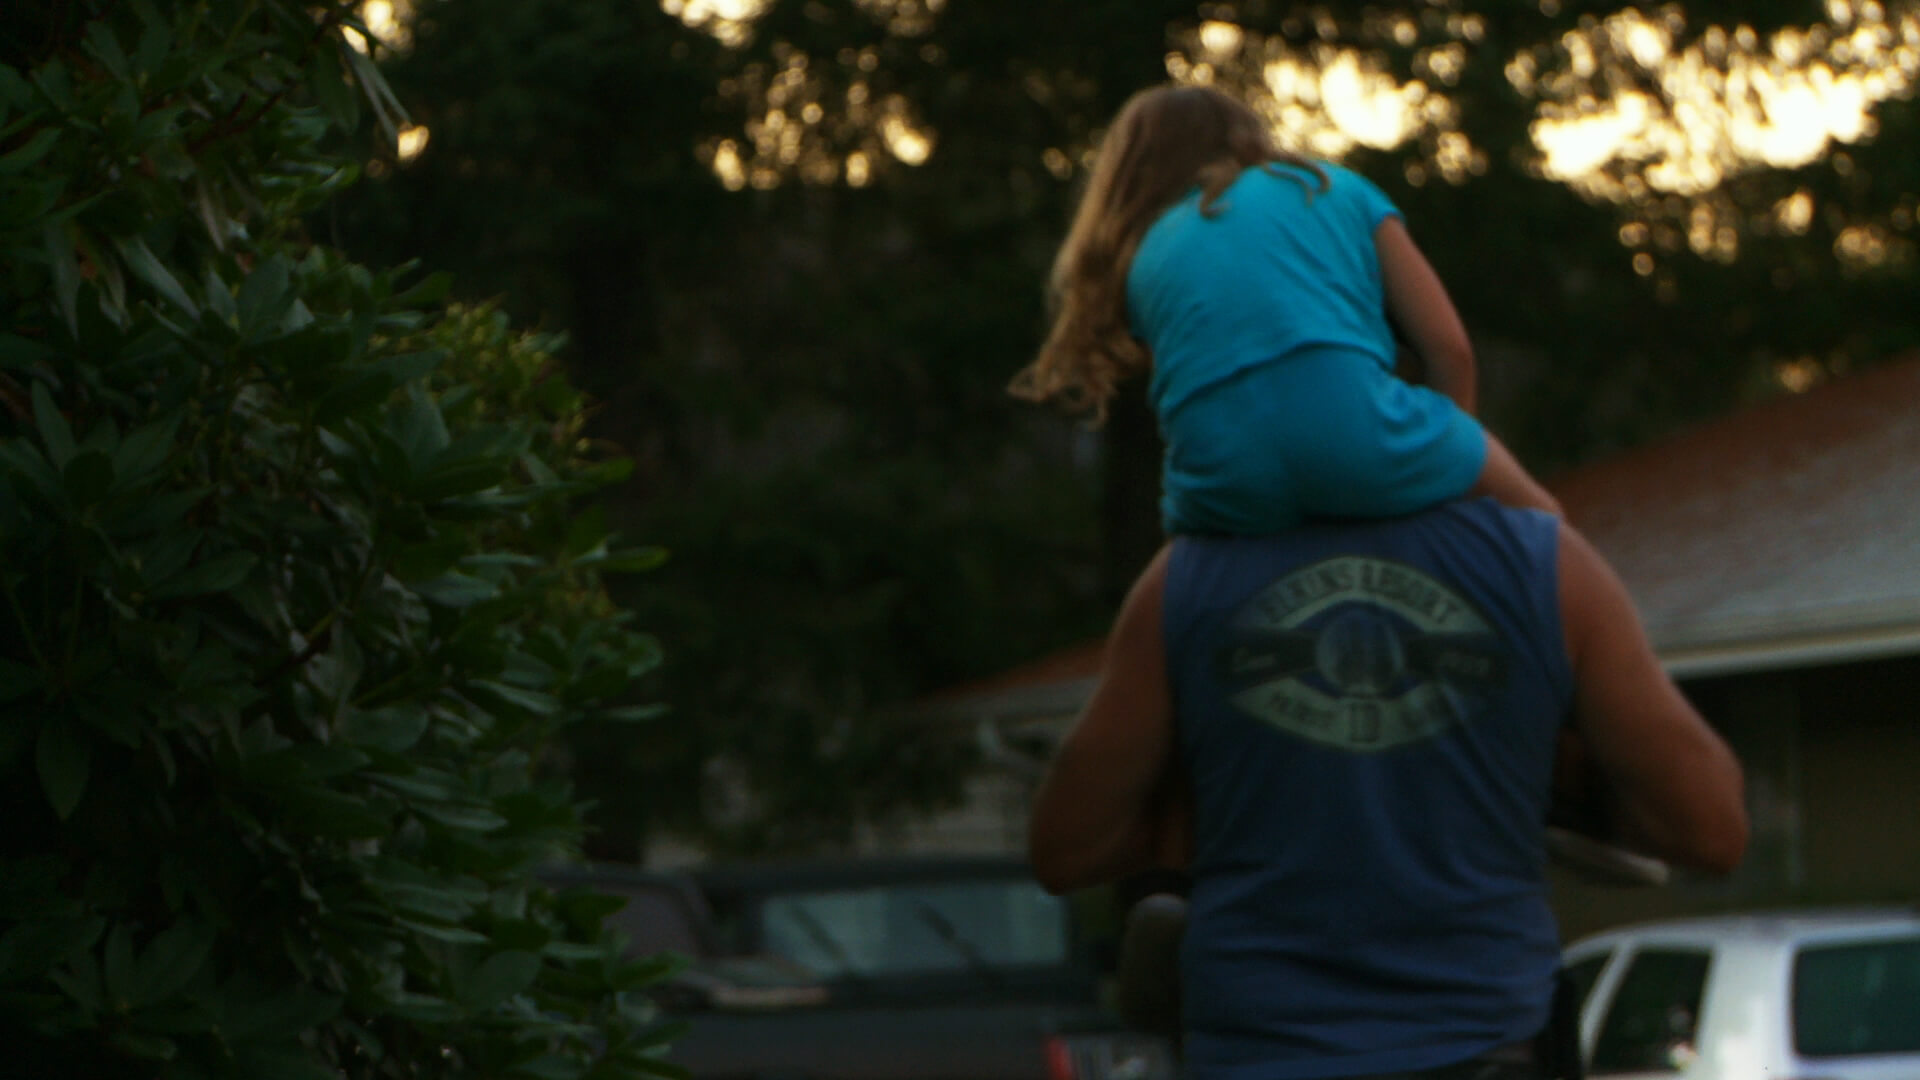 Still from Tough Love. A person is carrying a young girl on their shoulders, and both of them are turning their backs to the camera. There is a pine tree to their left.